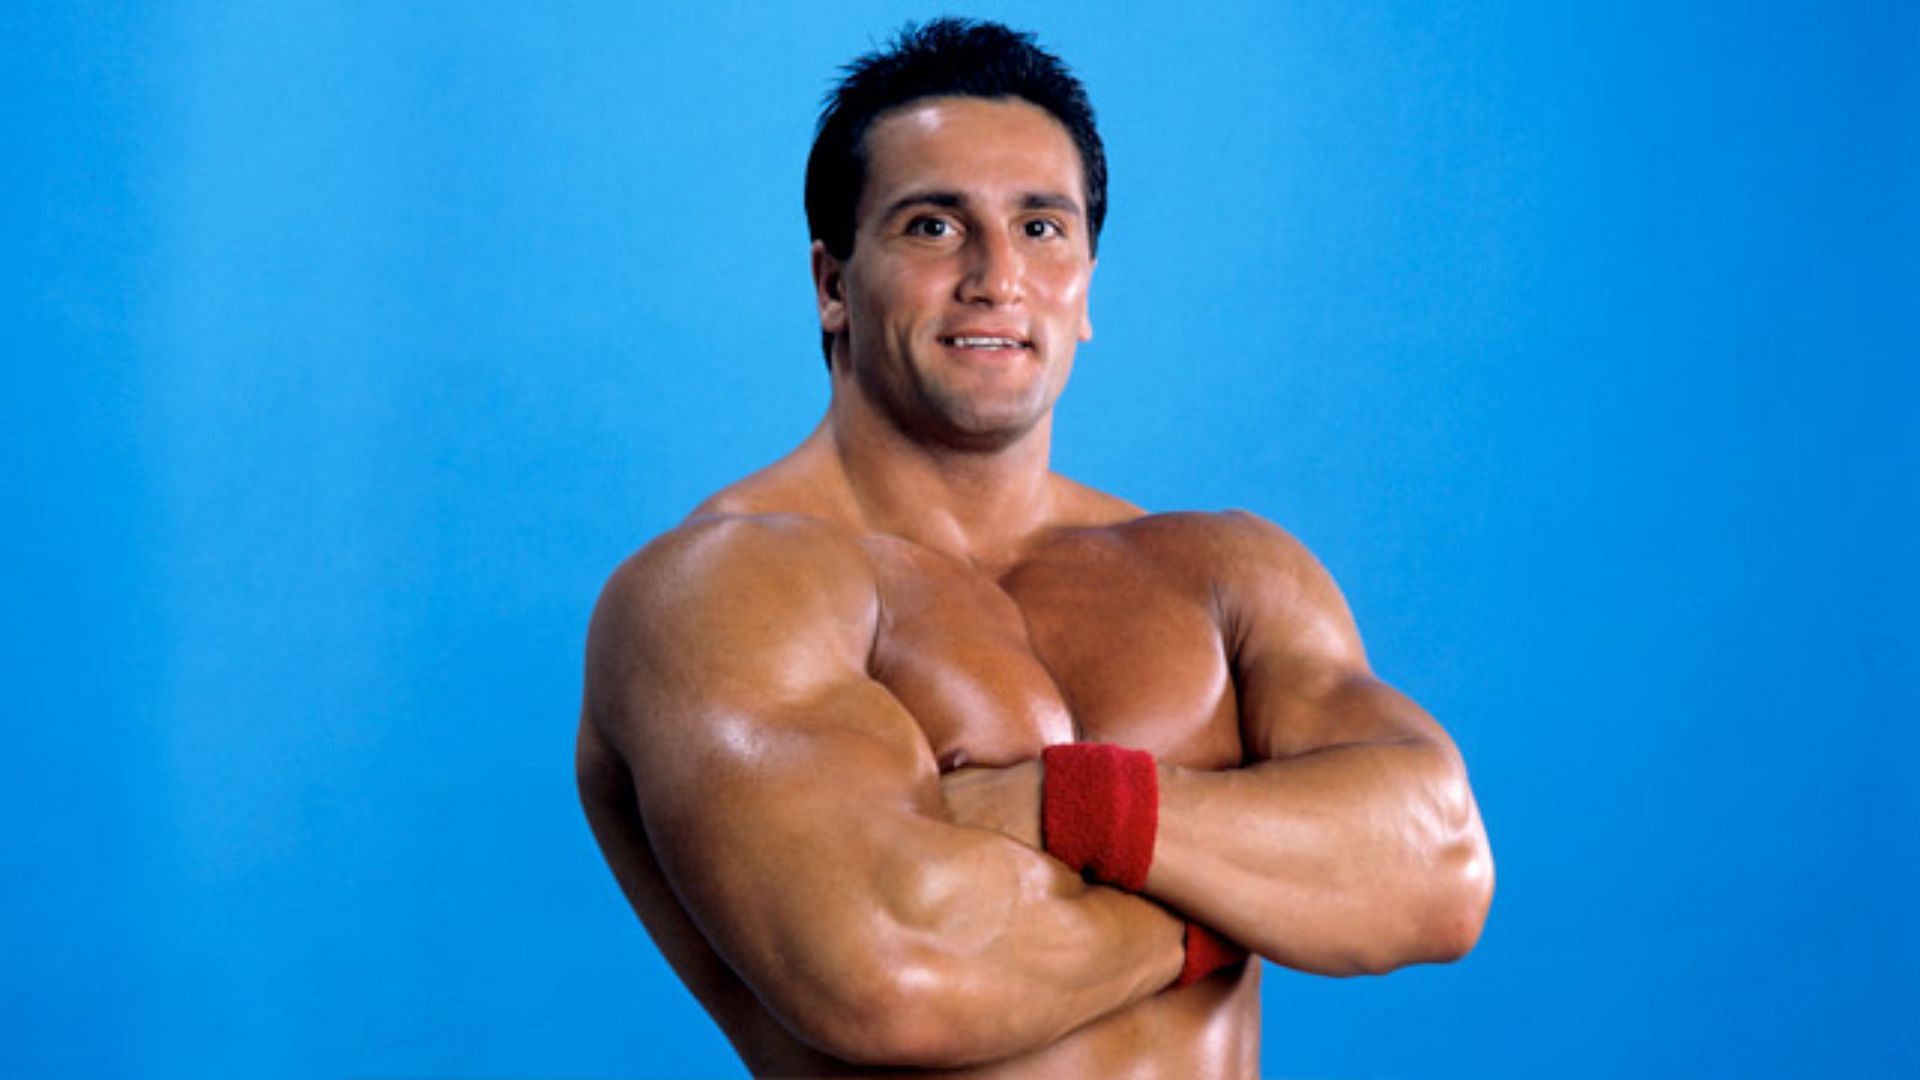 Paul Roma worked for WCW and WWE.